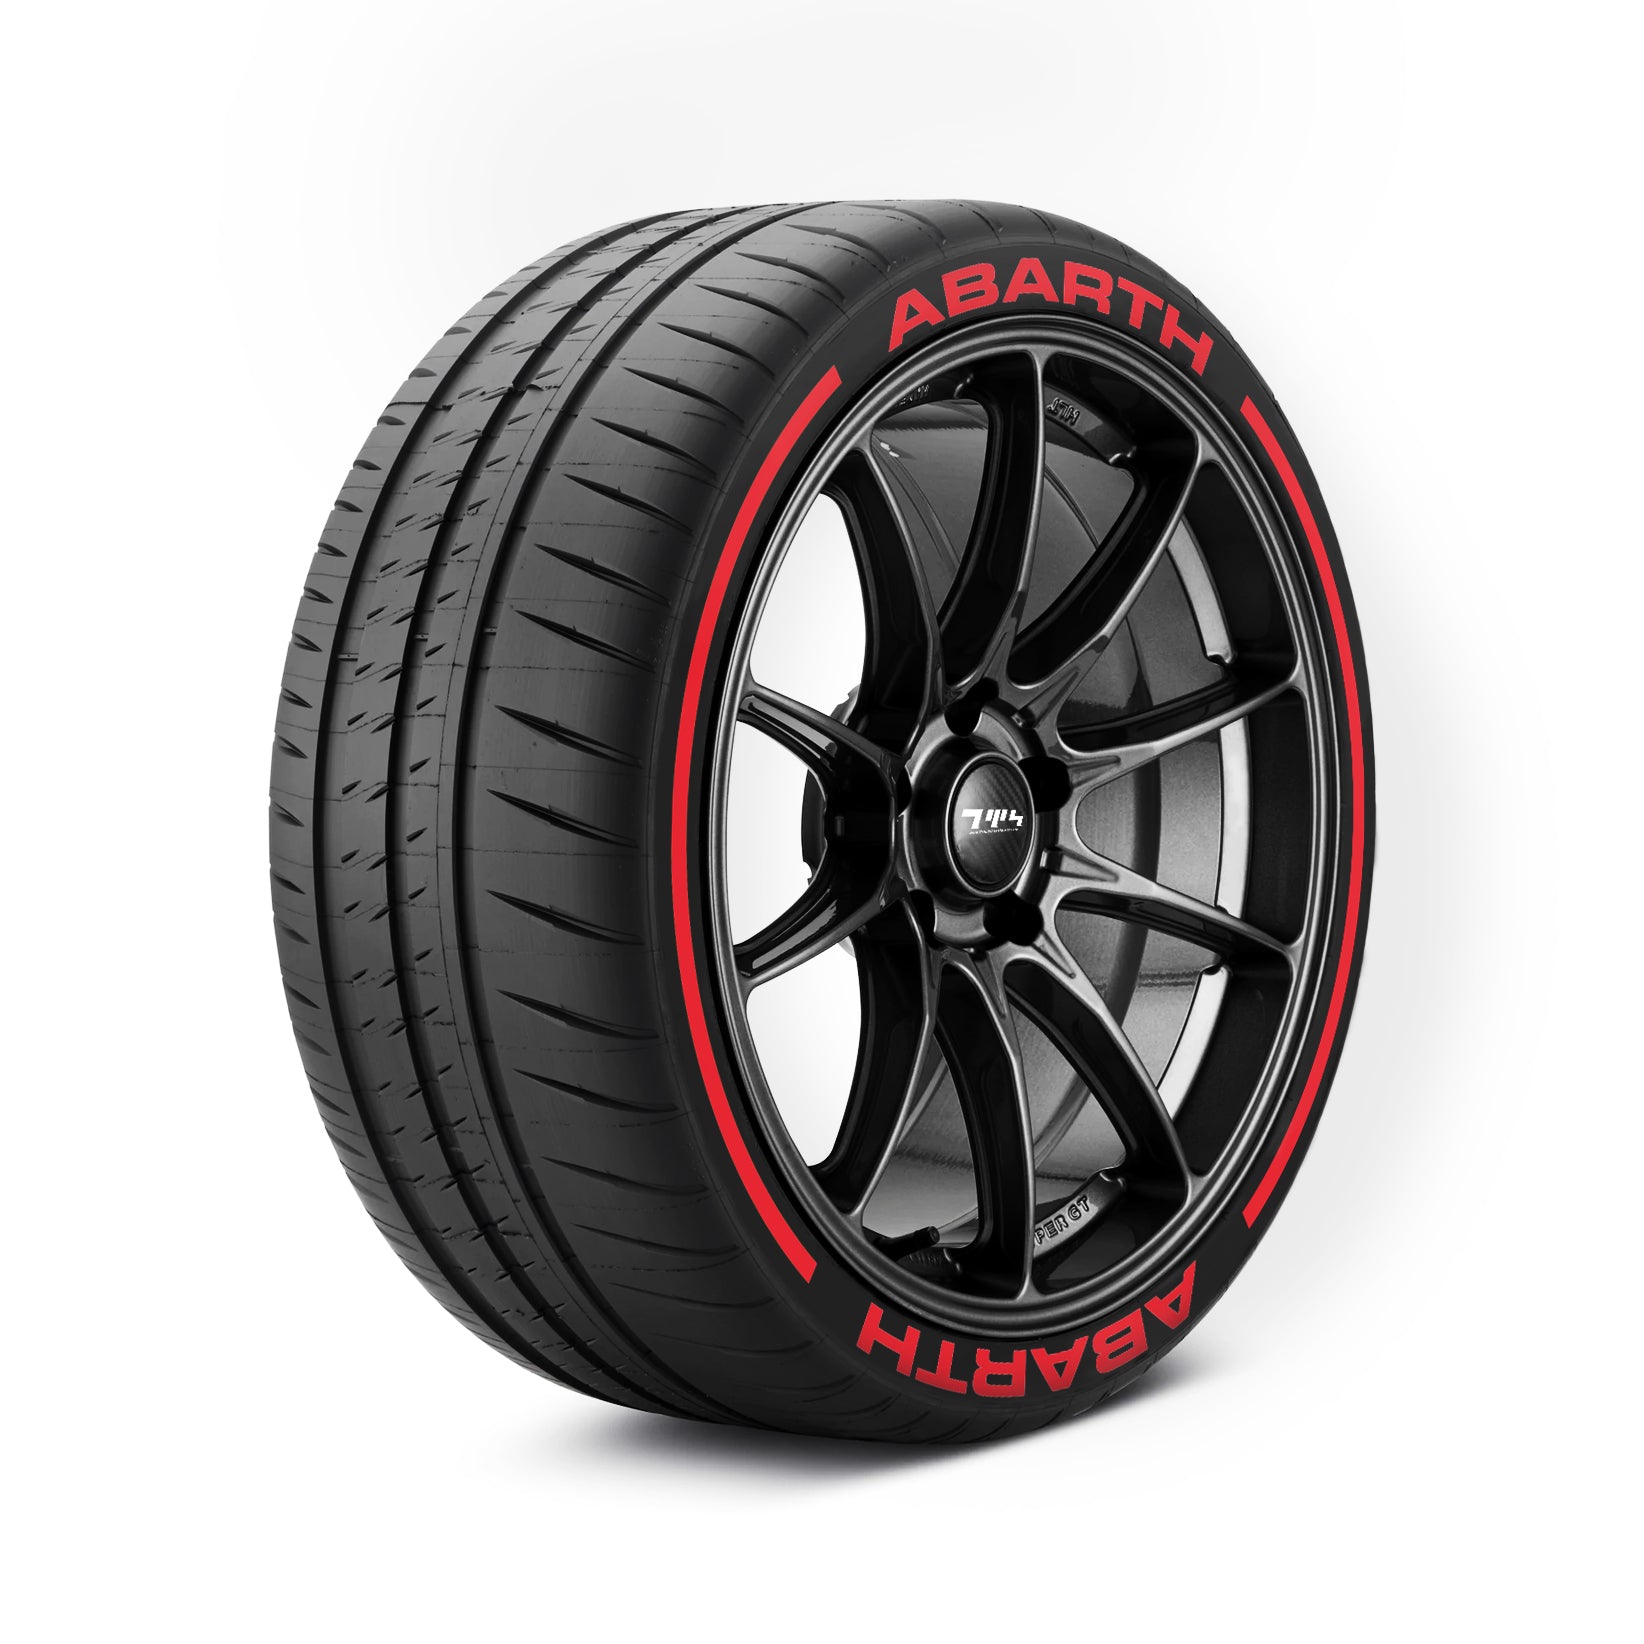 Abarth Tyre Stickers Kit With Pinstripes